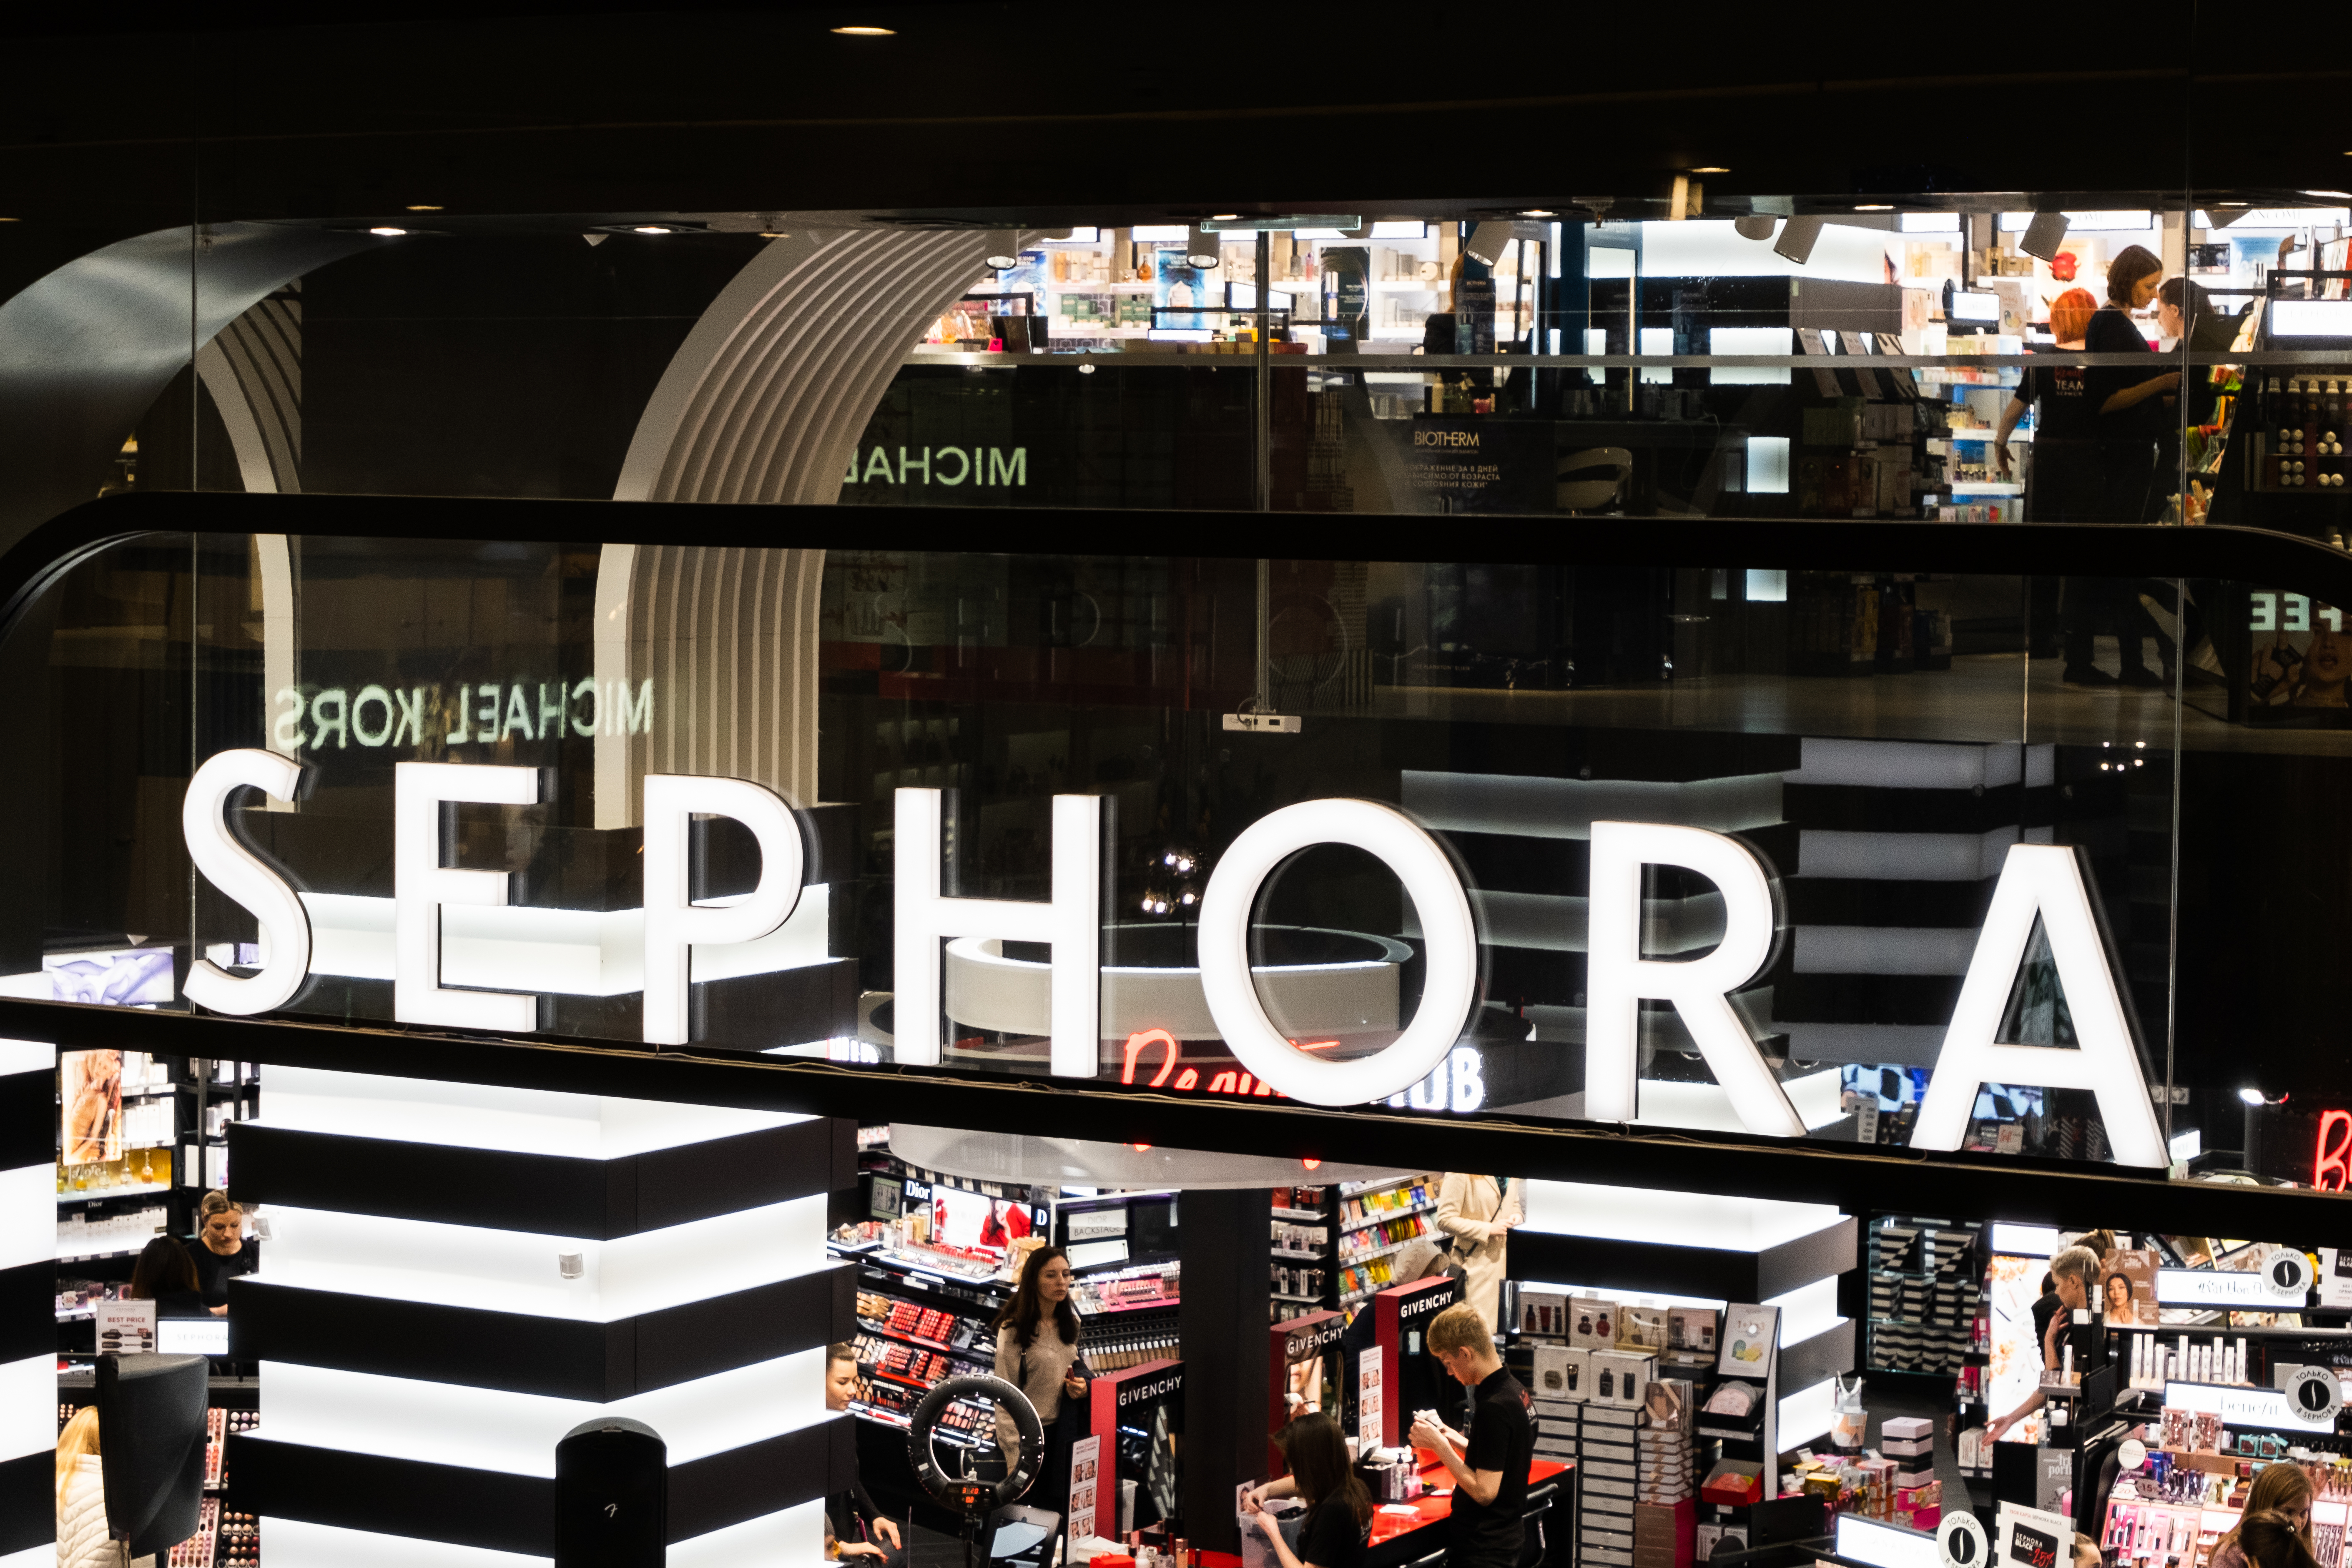 LVMH sells out all its Sephora stores in Russia - Premium Beauty News